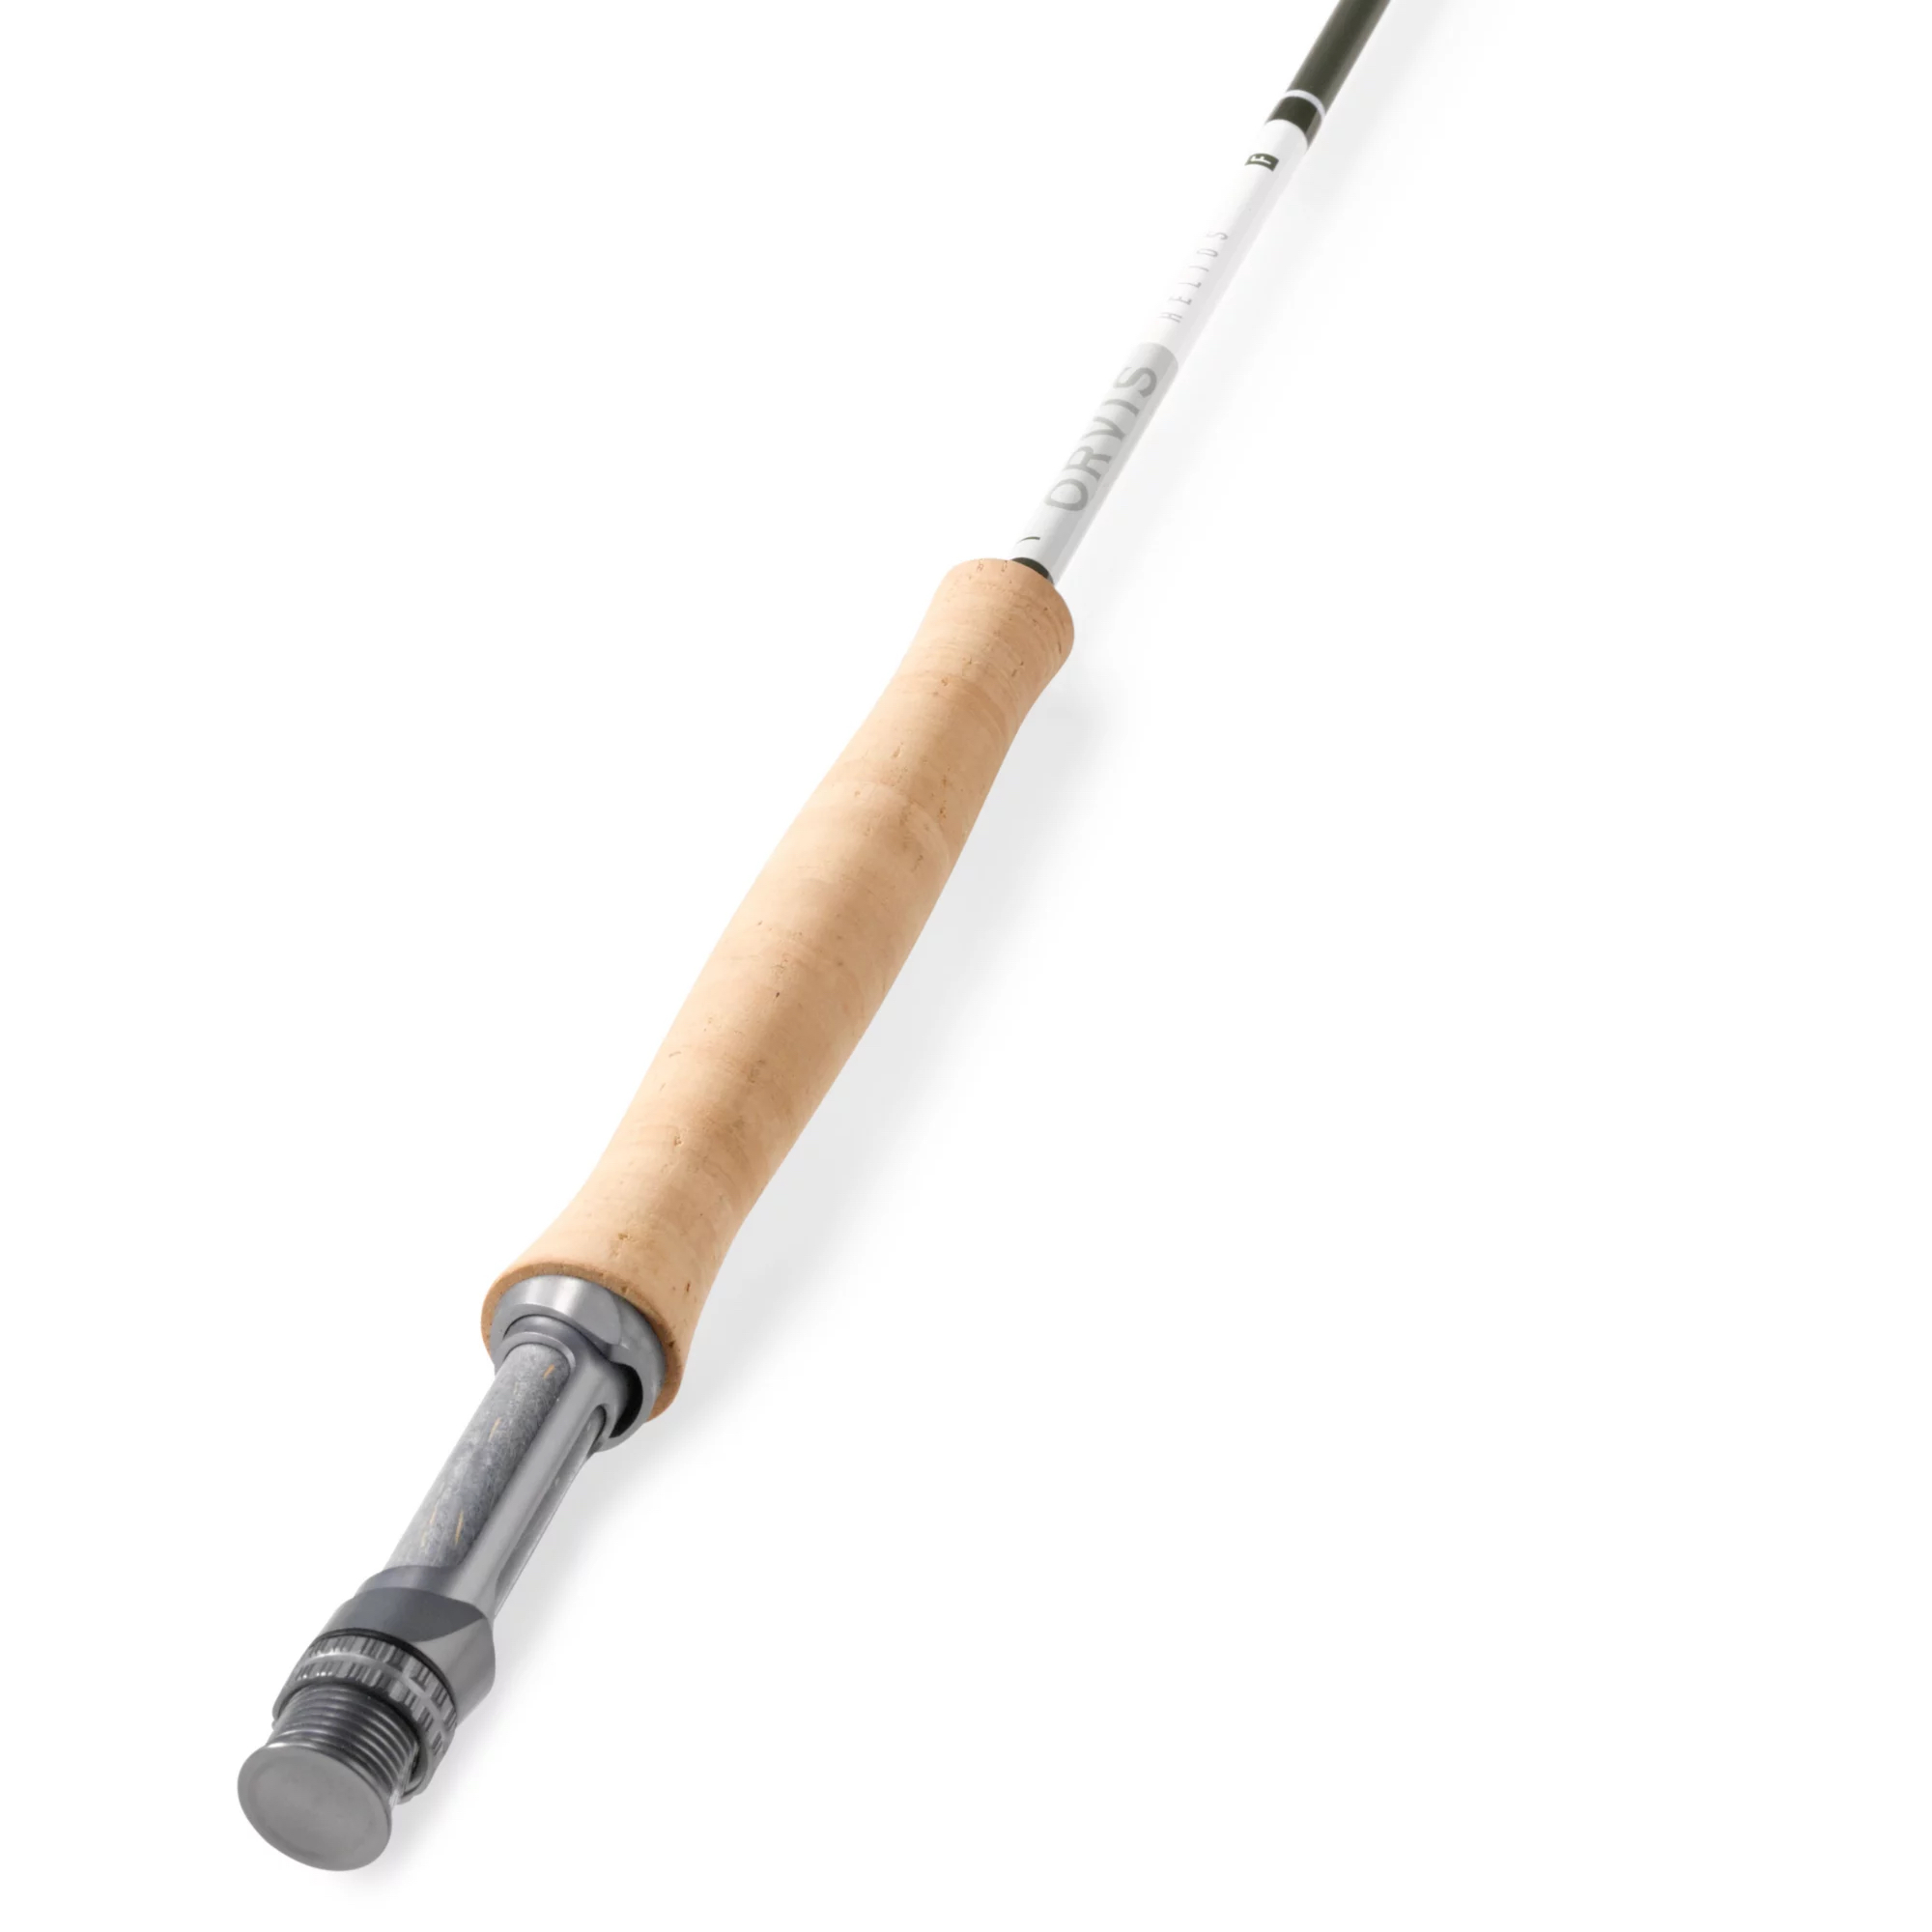 Orvis Helios F 9' 4-weight Fly Rod is the ultimate dry fly rod!